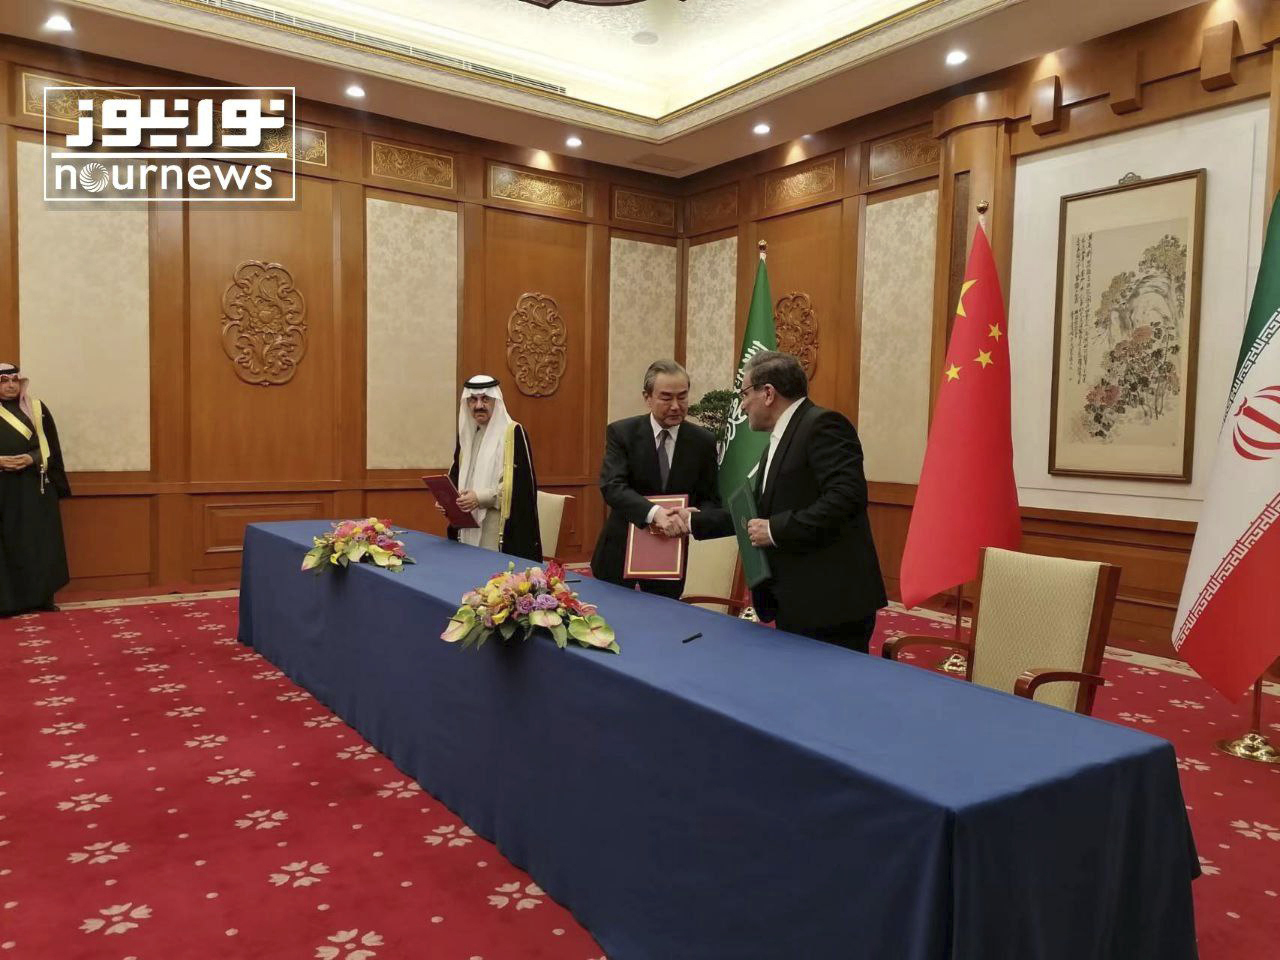 In a photo released by Nournews, Secretary of Iran's Supreme National Security Council Ali Shamkhani, right, greets Wang Yi, China's top diplomat, as Saudi national security adviser Musaad bin Mohammed looks on. al-Aiban, during a ceremony for the signing of an agreement between Iran and Saudi Arabia to restore diplomatic relations and reopen embassies after seven years of tensions, in Beijing, China, Friday, March 10, 2023. (Nournews via AP)